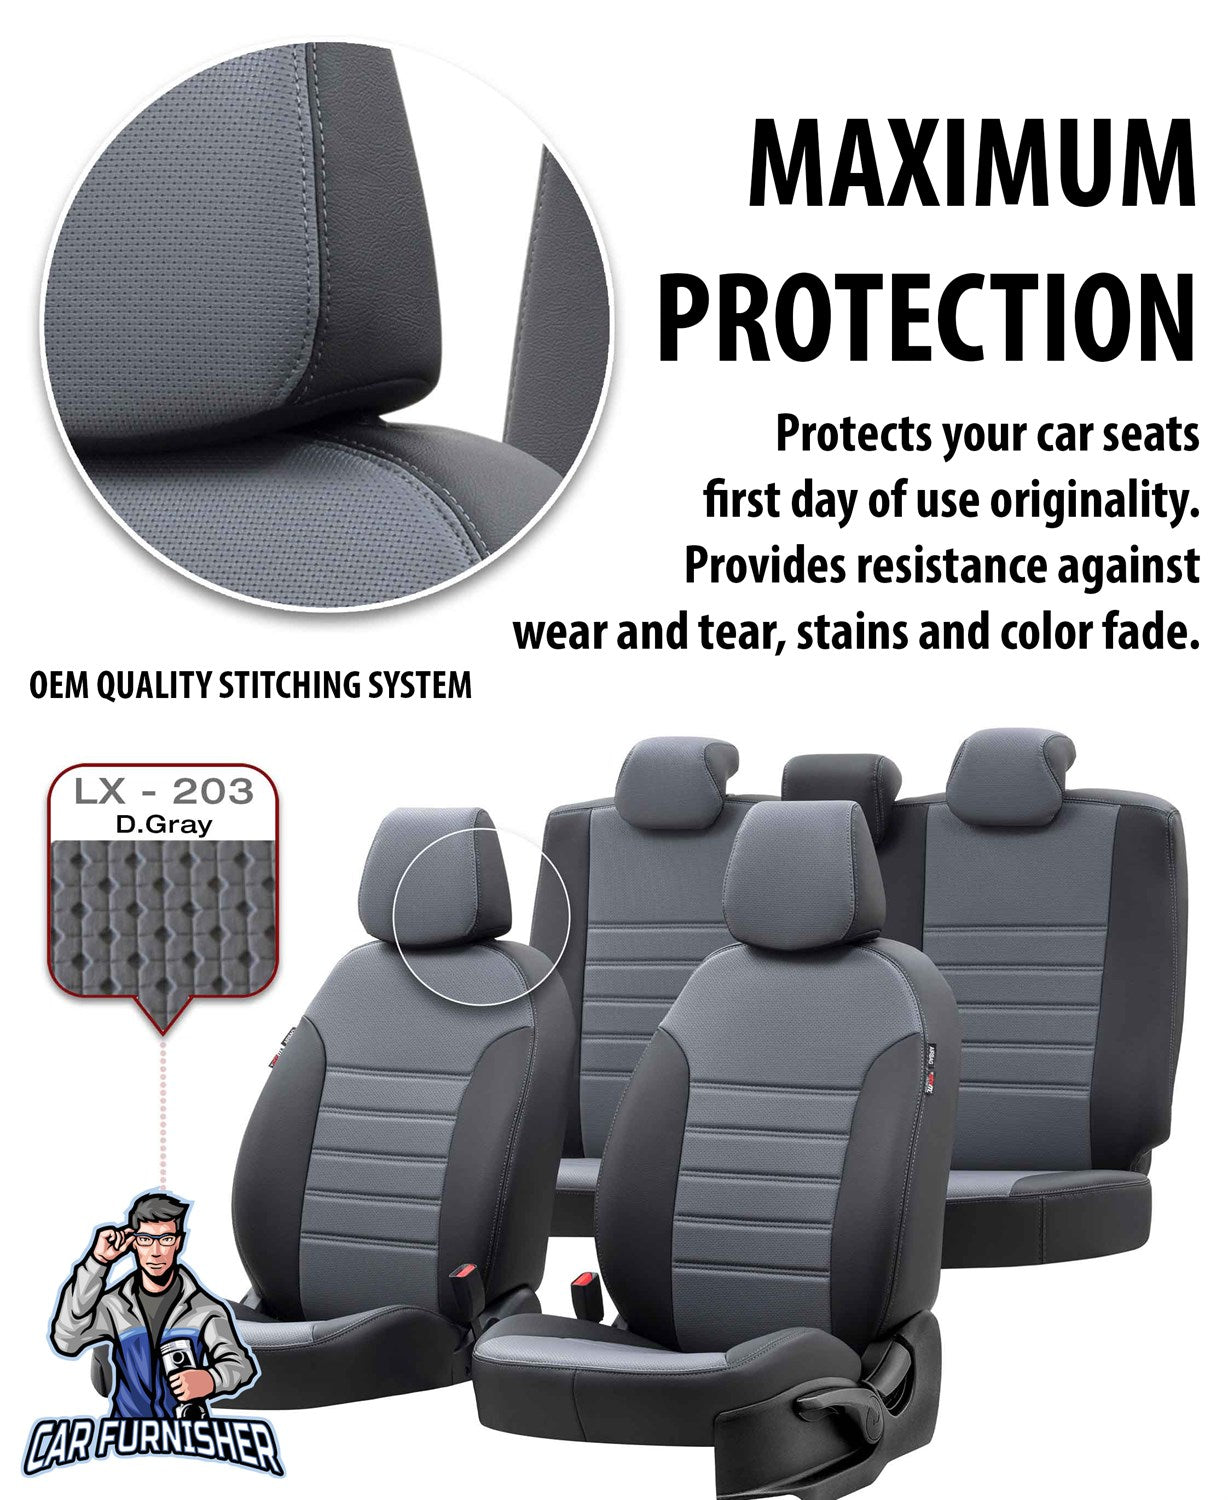 Seat Alhambra Seat Covers New York Leather Design Smoked Leather